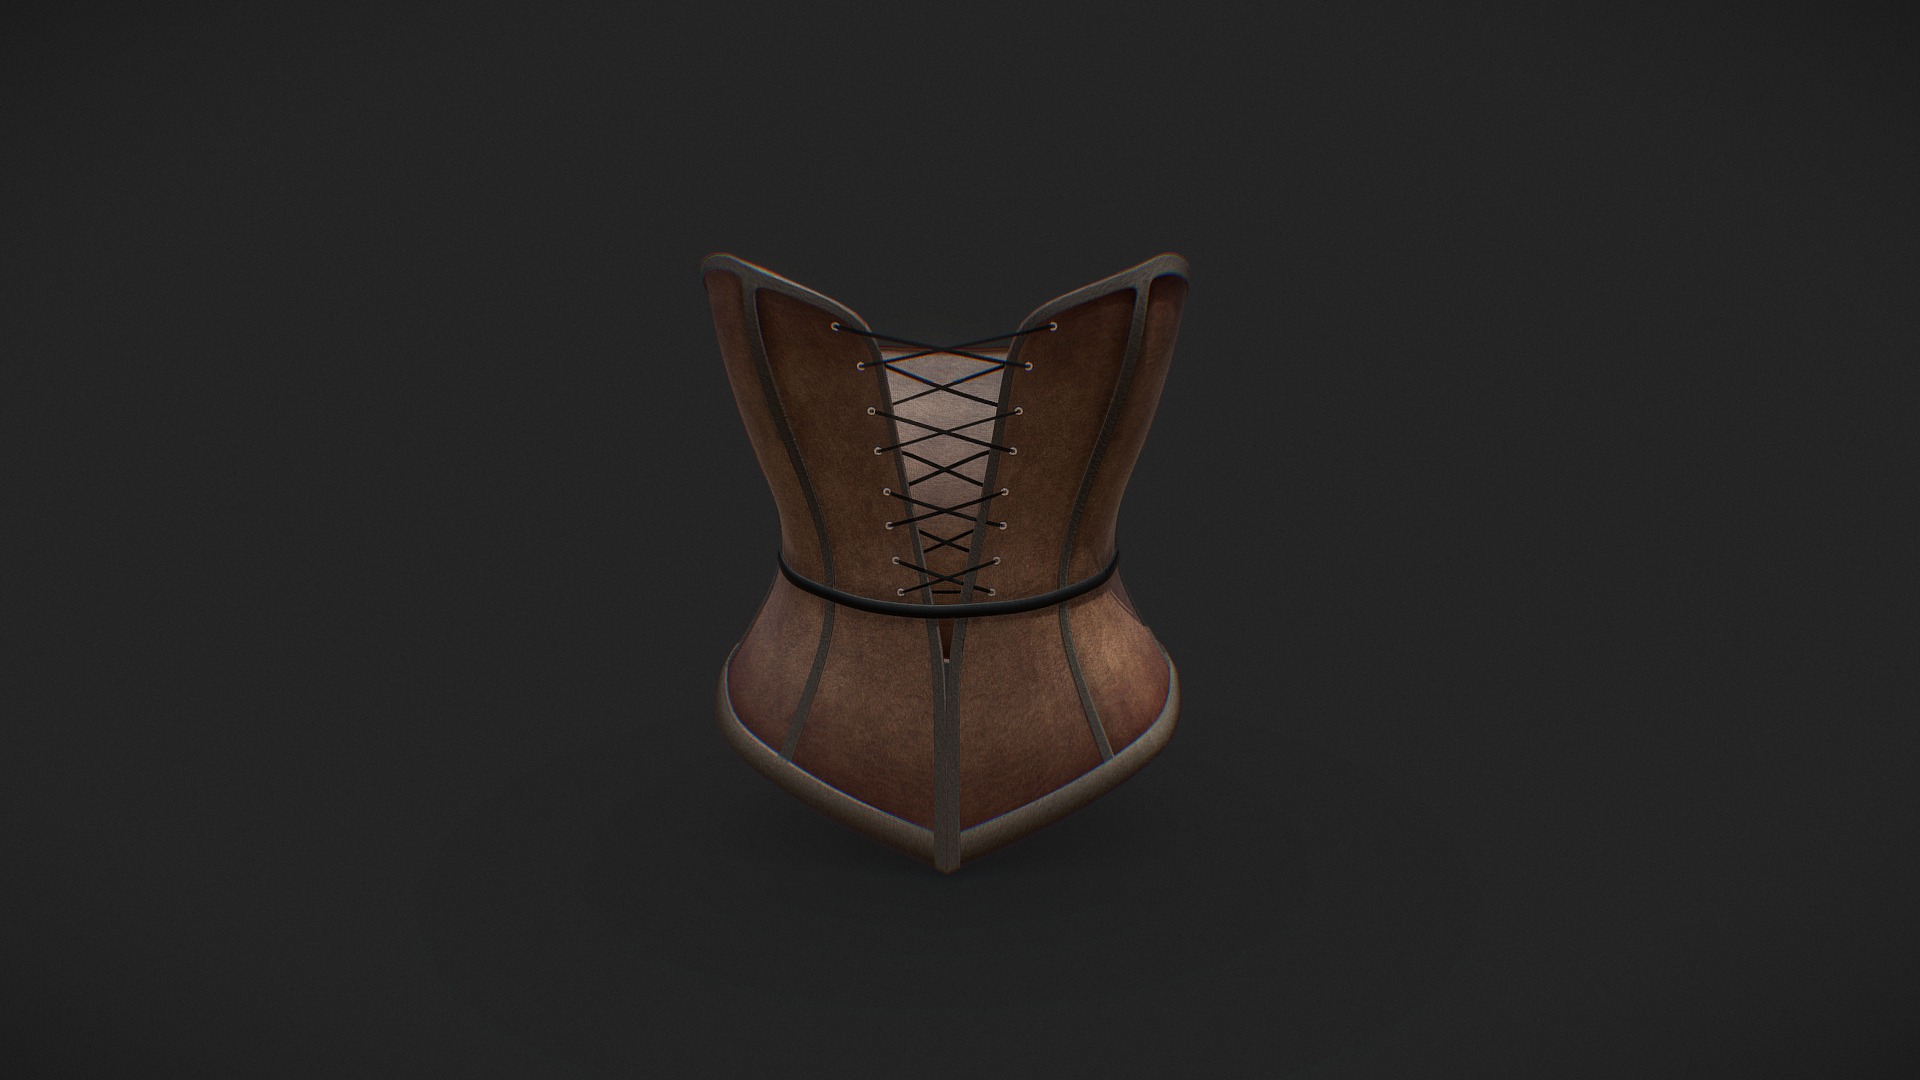 3D model Vintage Corset - This is a 3D model of the Vintage Corset. The 3D model is about a basketball on a black background.